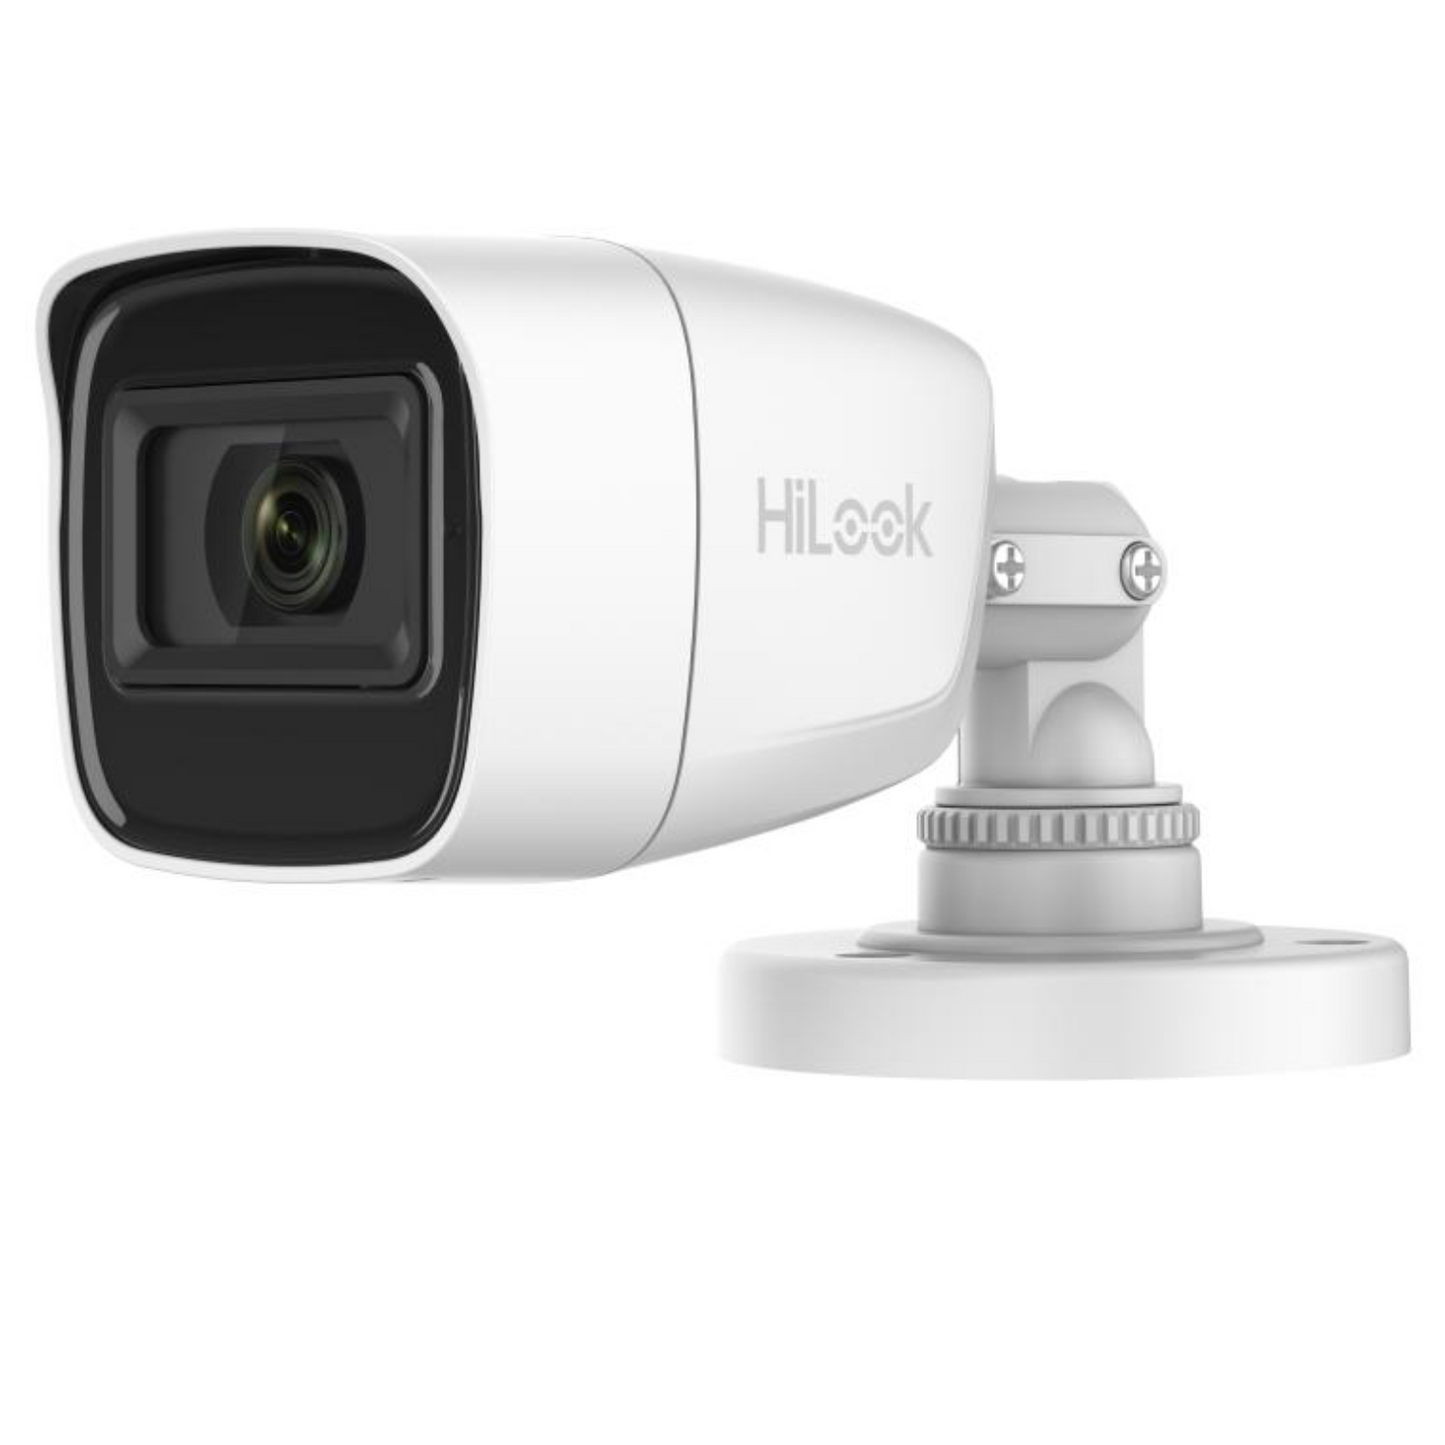 2MP Hikvision Hilook Built in Mic Fixed Lens THC-B120-MS(2.8MM)